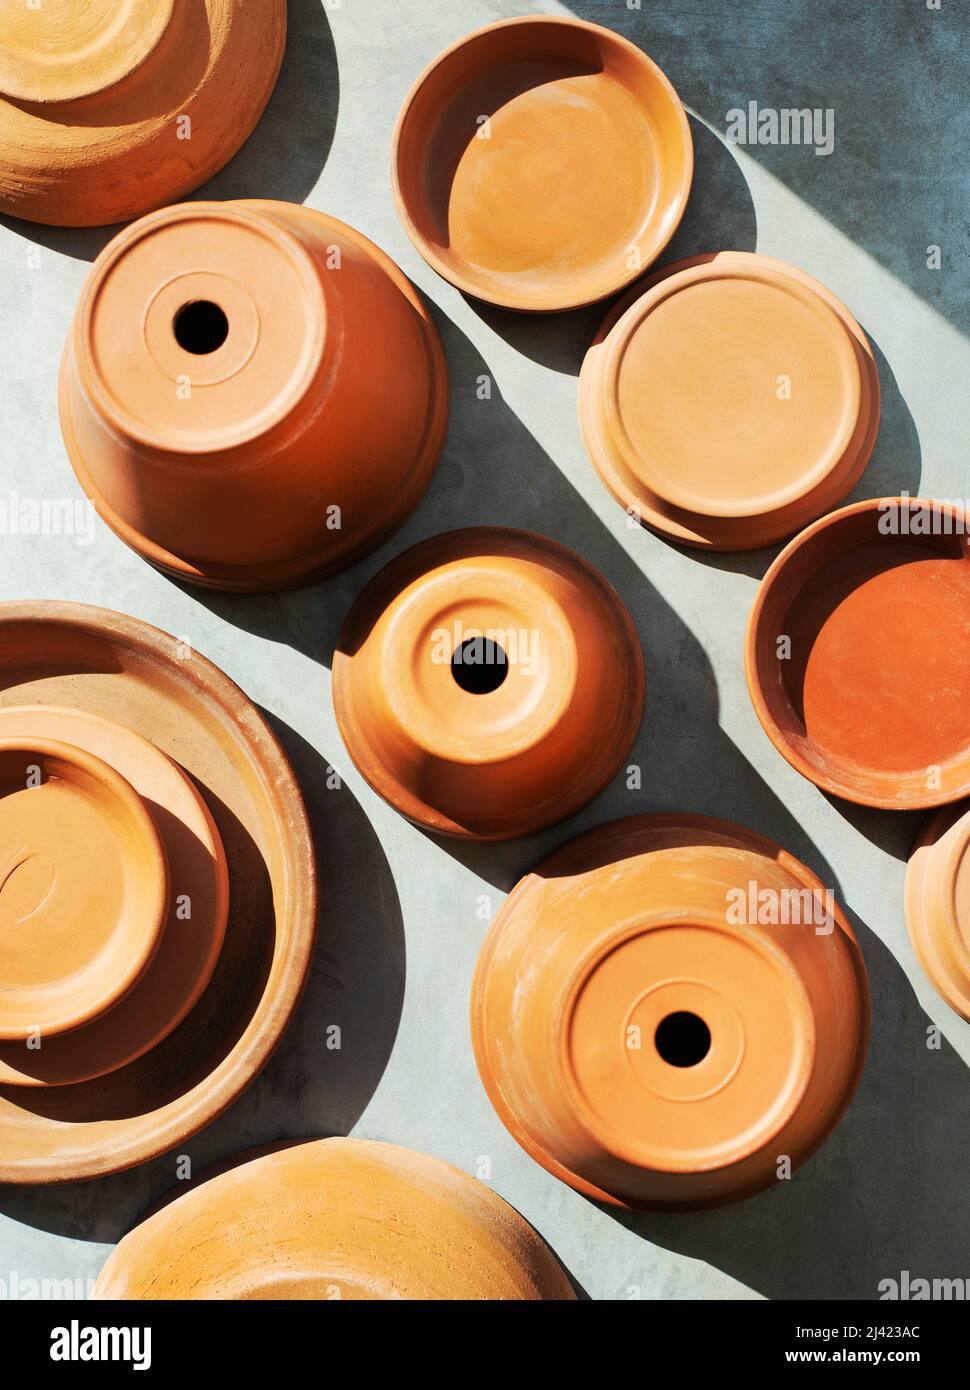 Collection of terra cotta pots and plates Stock Photo